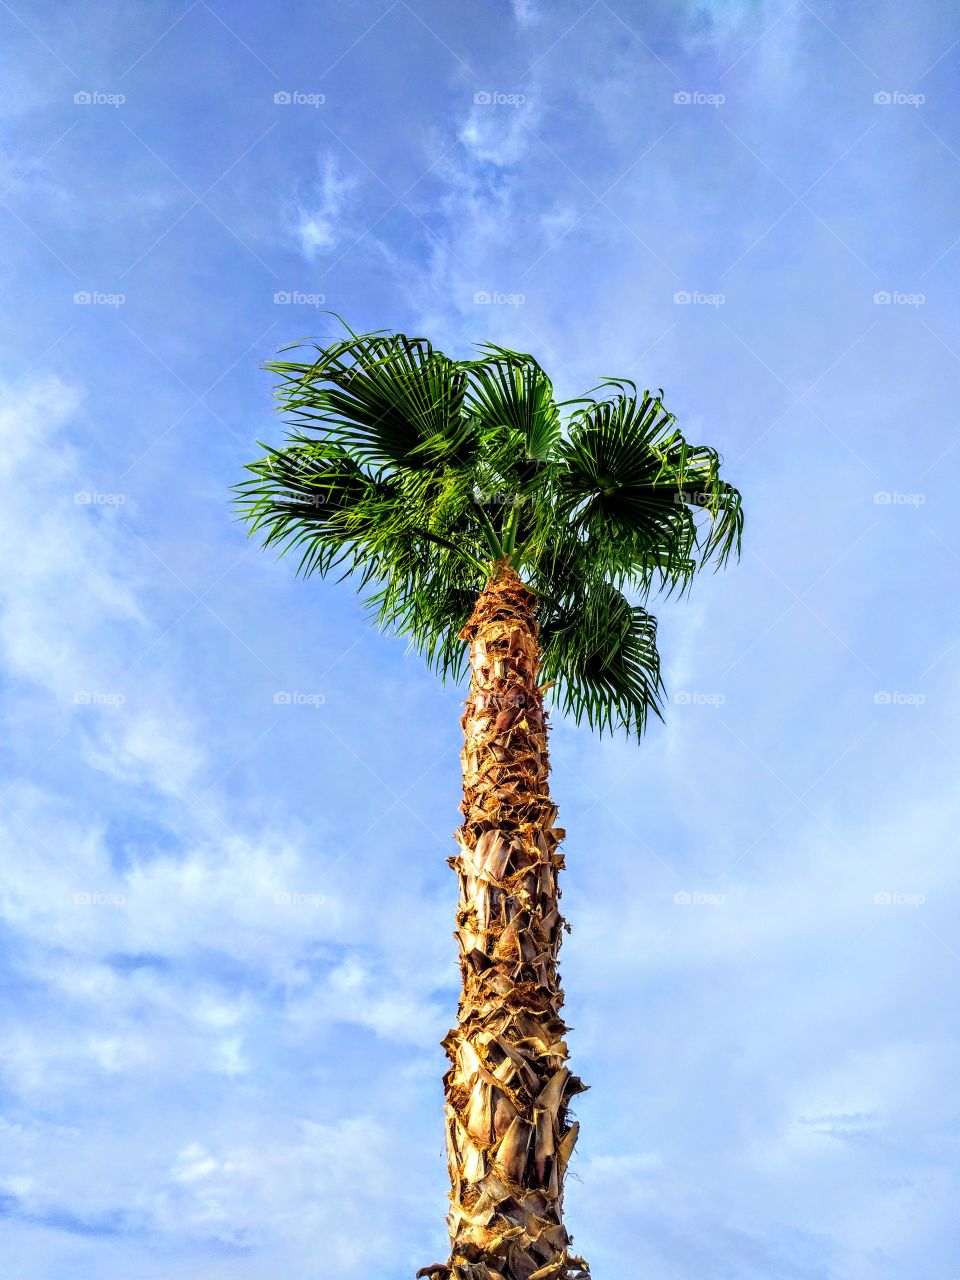 Palm tree with blue skies